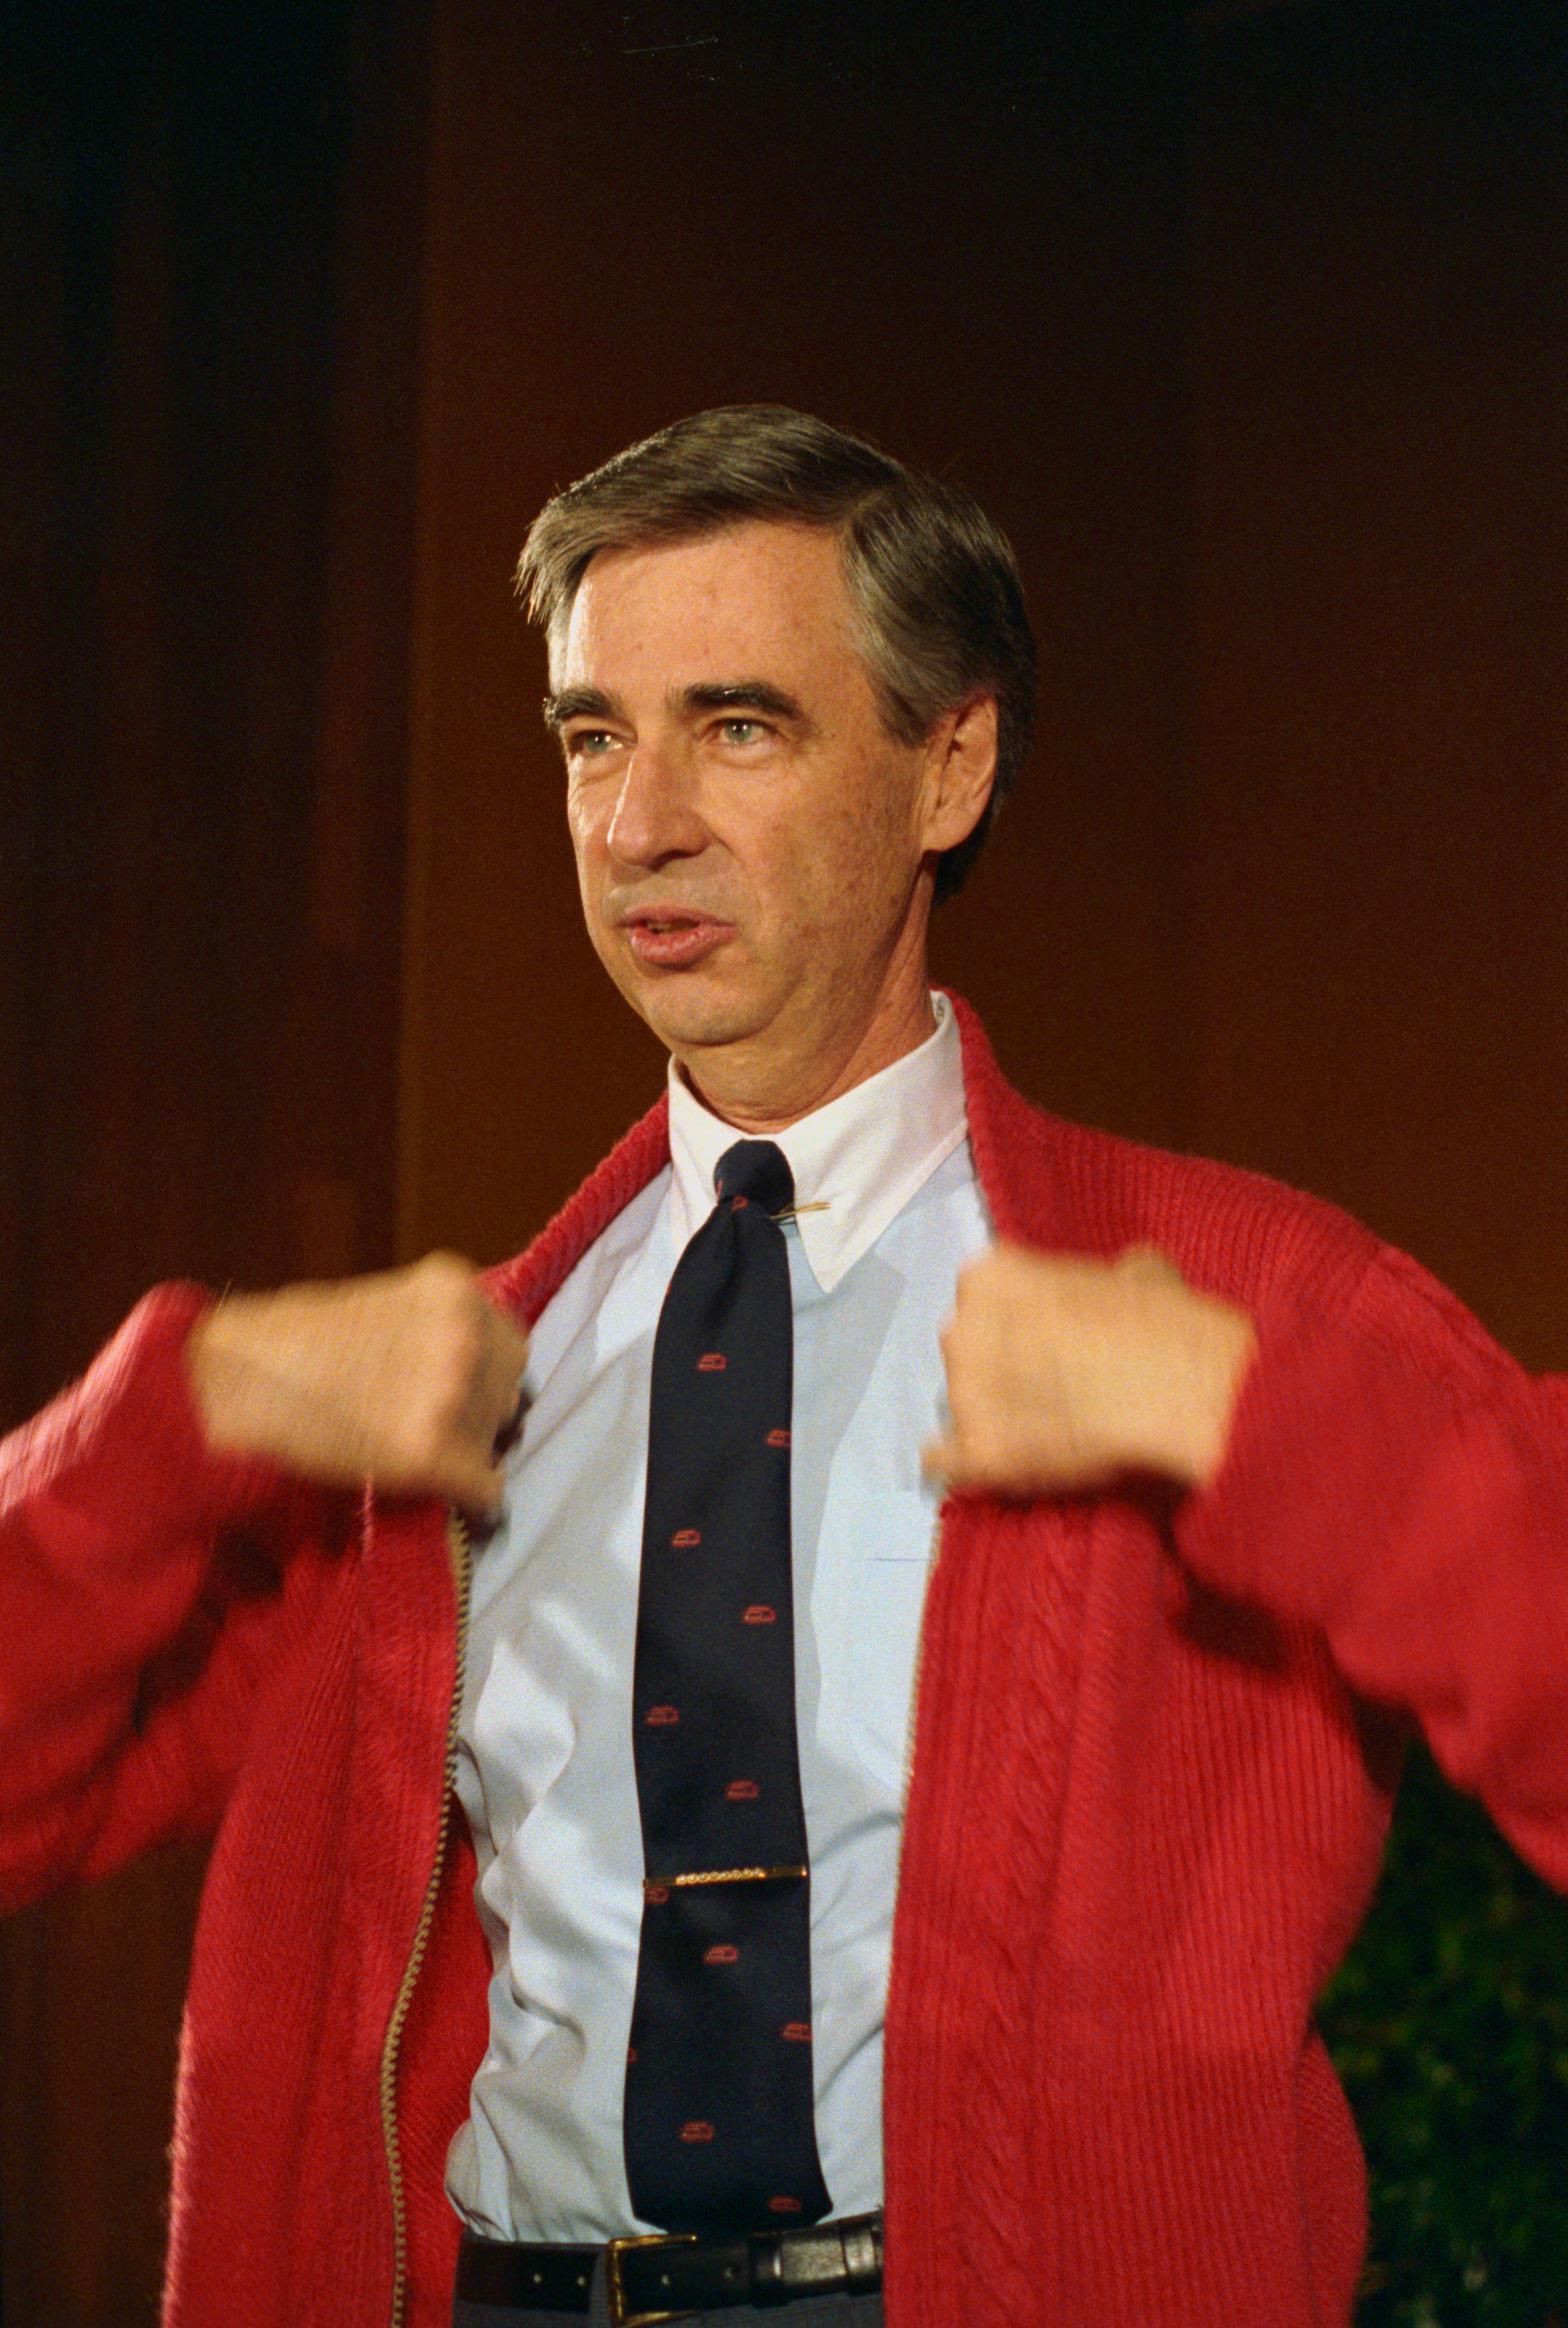 Fred Rogers donates his famous red cardigan sweater to the National Museum of American History, Smithsonian Institution on November 20, 1984, in Washington, DC. | Source: Getty Images